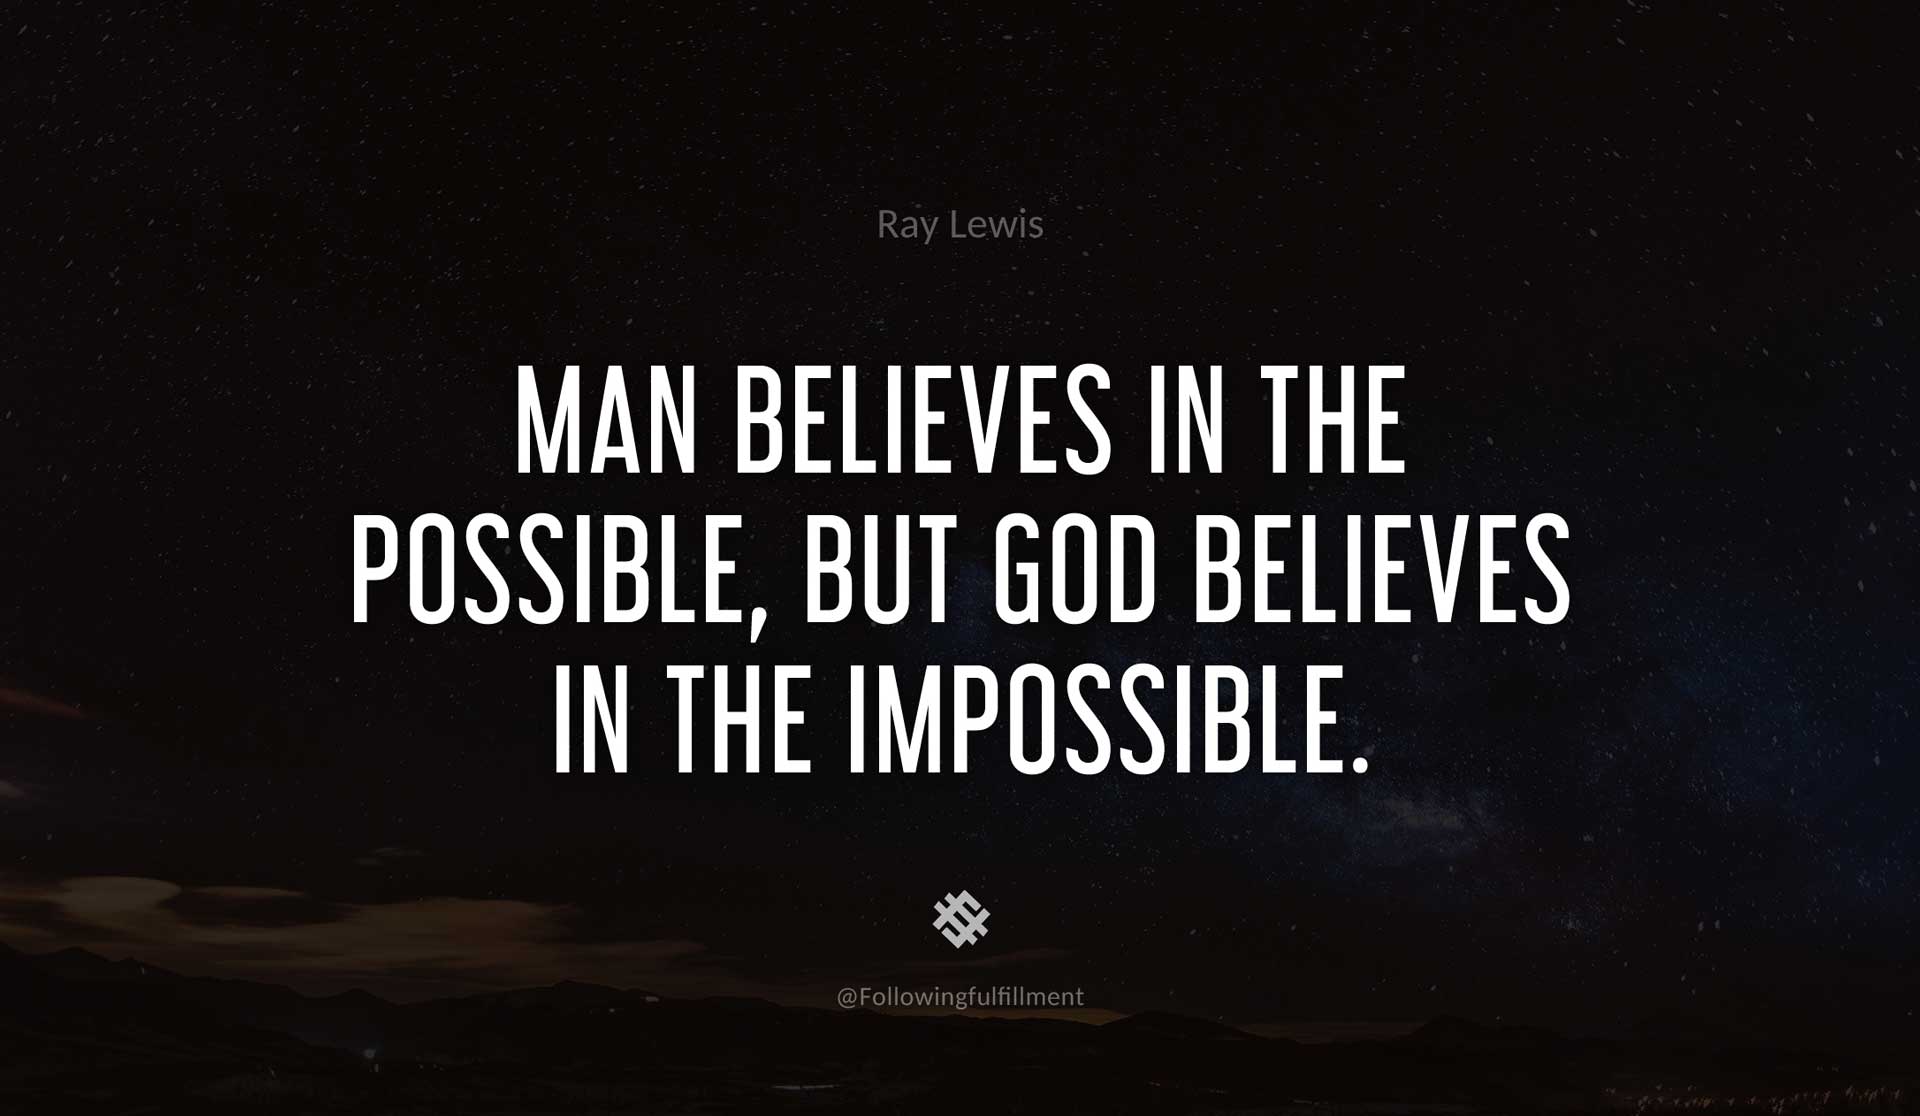 Man-believes-in-the-possible,-but-God-believes-in-the-impossible.-RAY-LEWIS-Quote.jpg